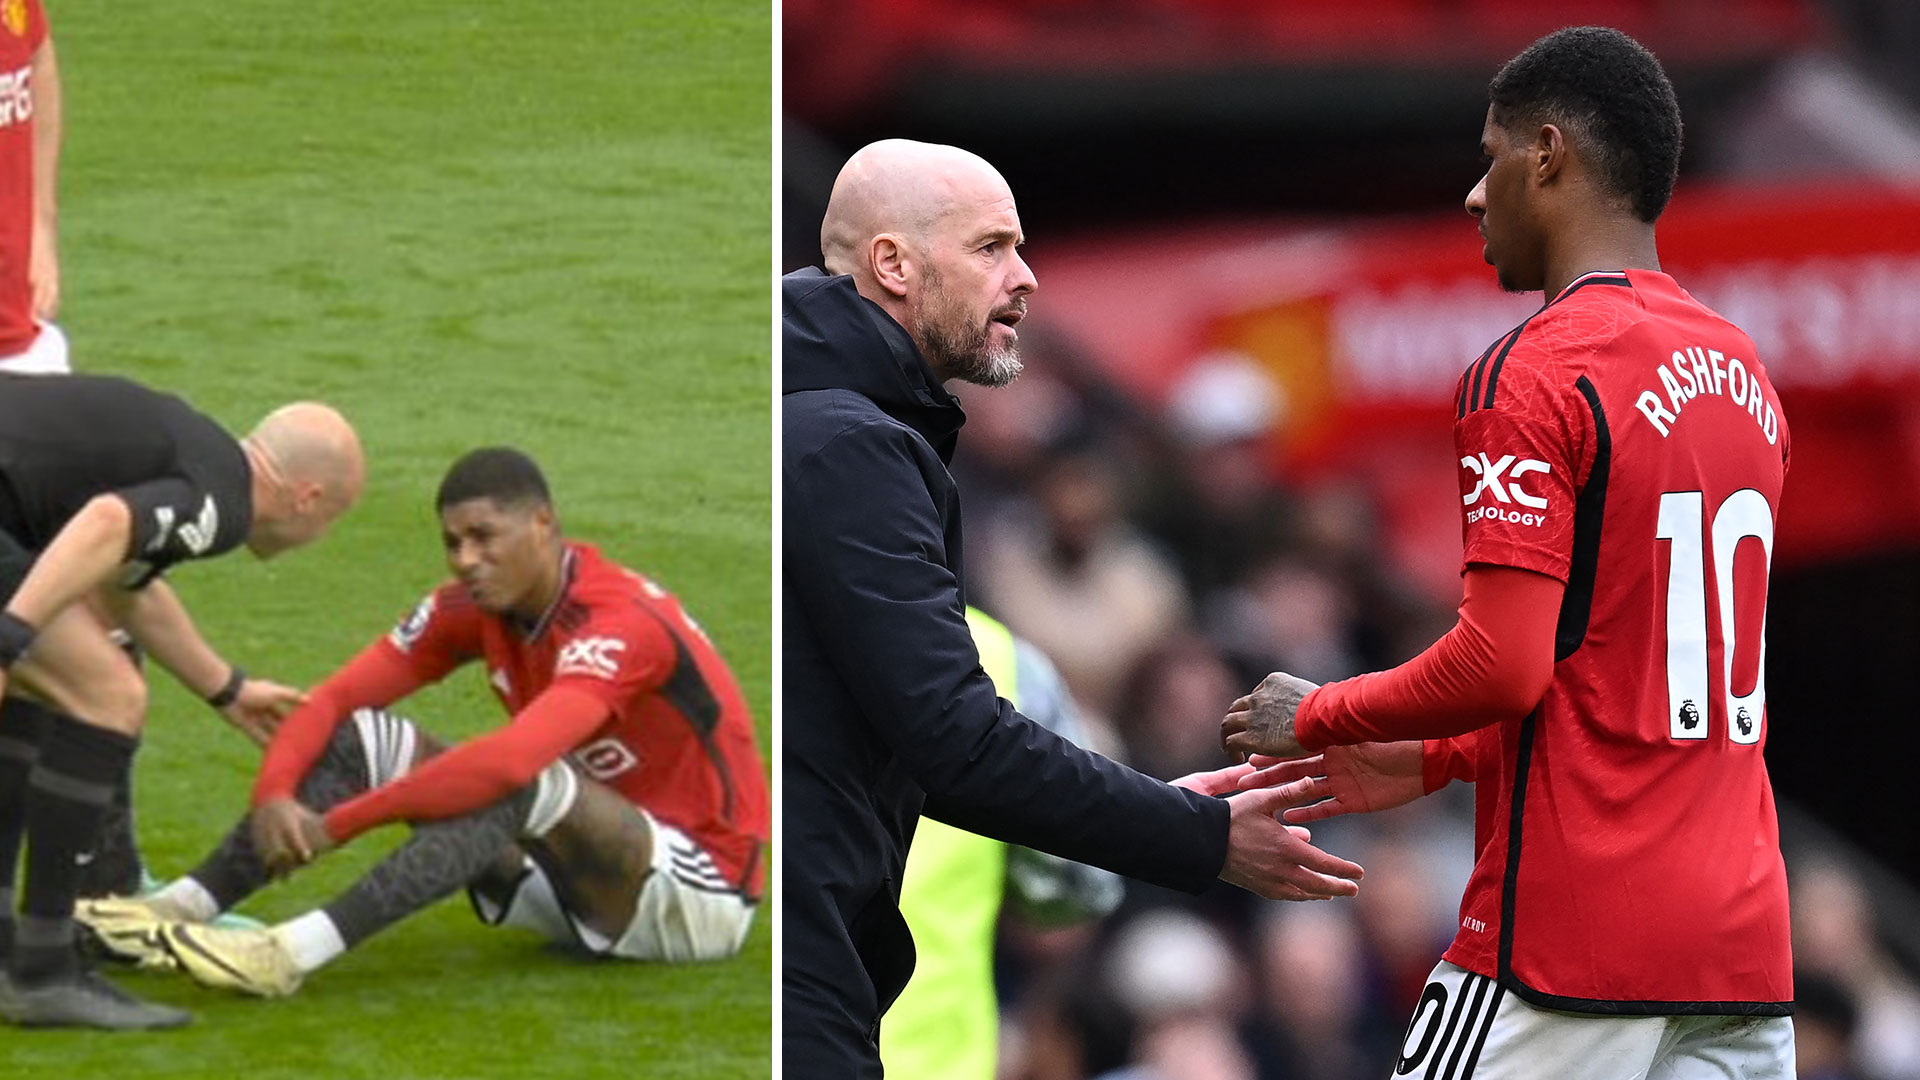 Marcus Rashford looks distressed as he is forced off injured in Man Utd’s clash against Liverpool [Video]